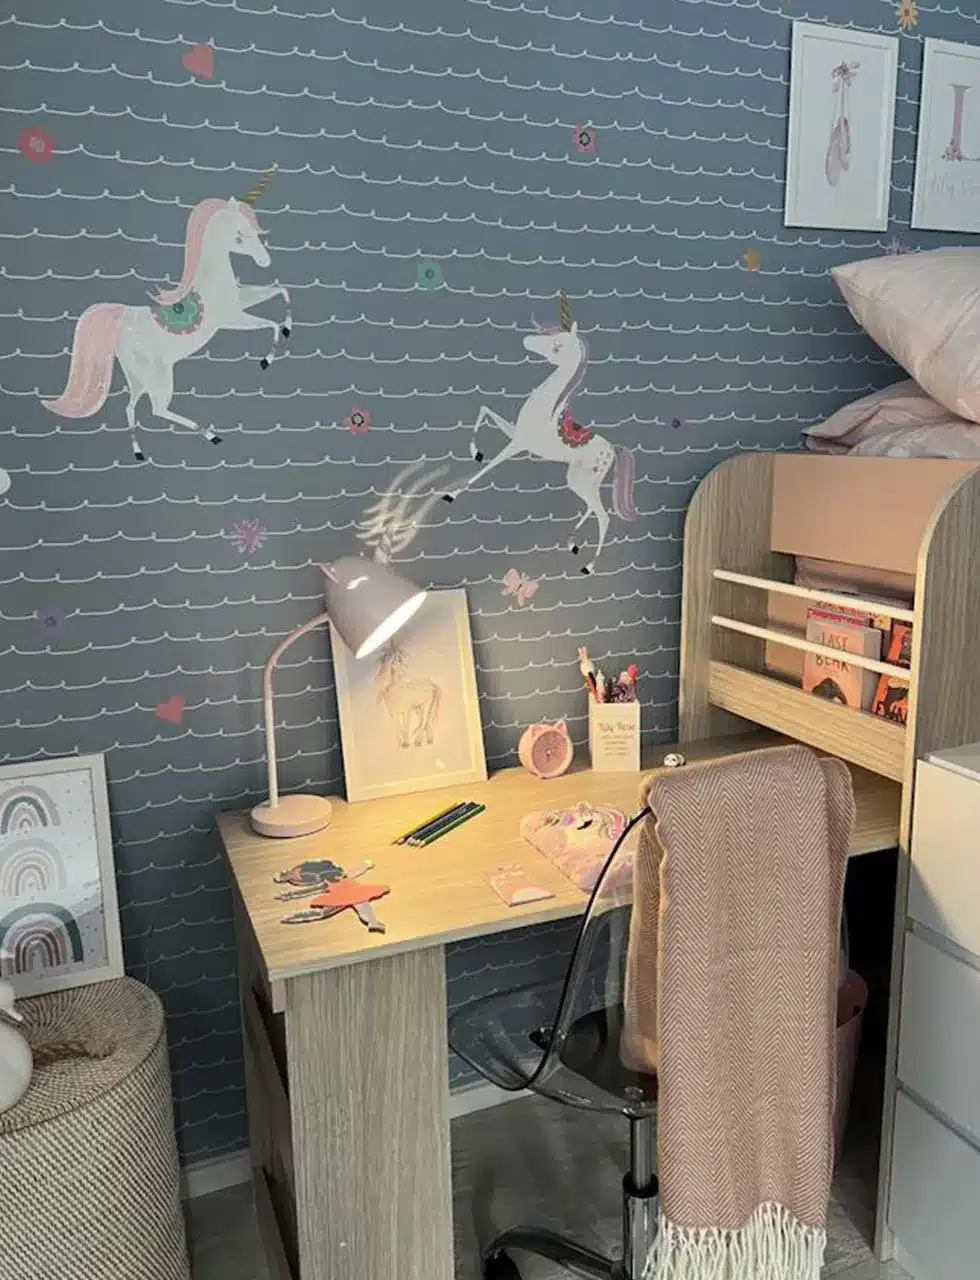 A child's room designed by Katharine Pooleys interior design team, as part of charity project Decorate a Childs Life by The Childhood Trust